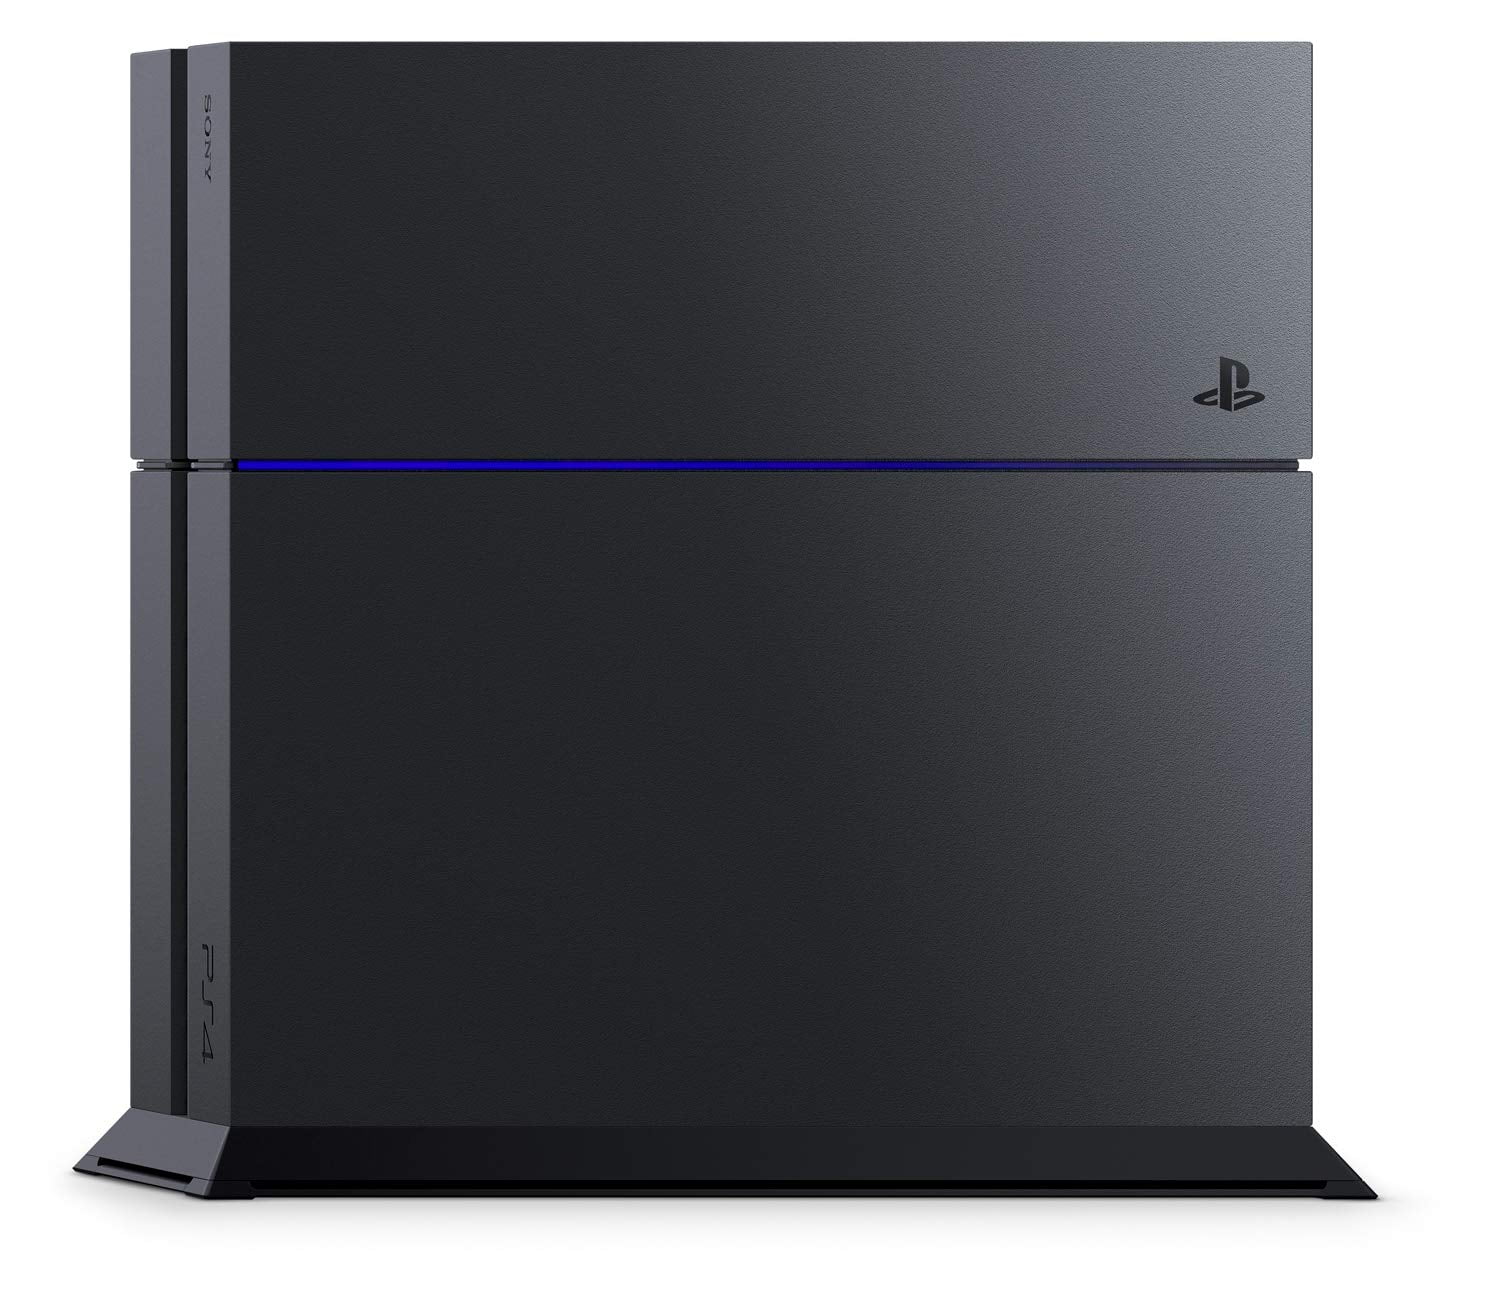 File:Sony-PlayStation-4-PS4-Console-FL.jpg - Wikibooks, open books